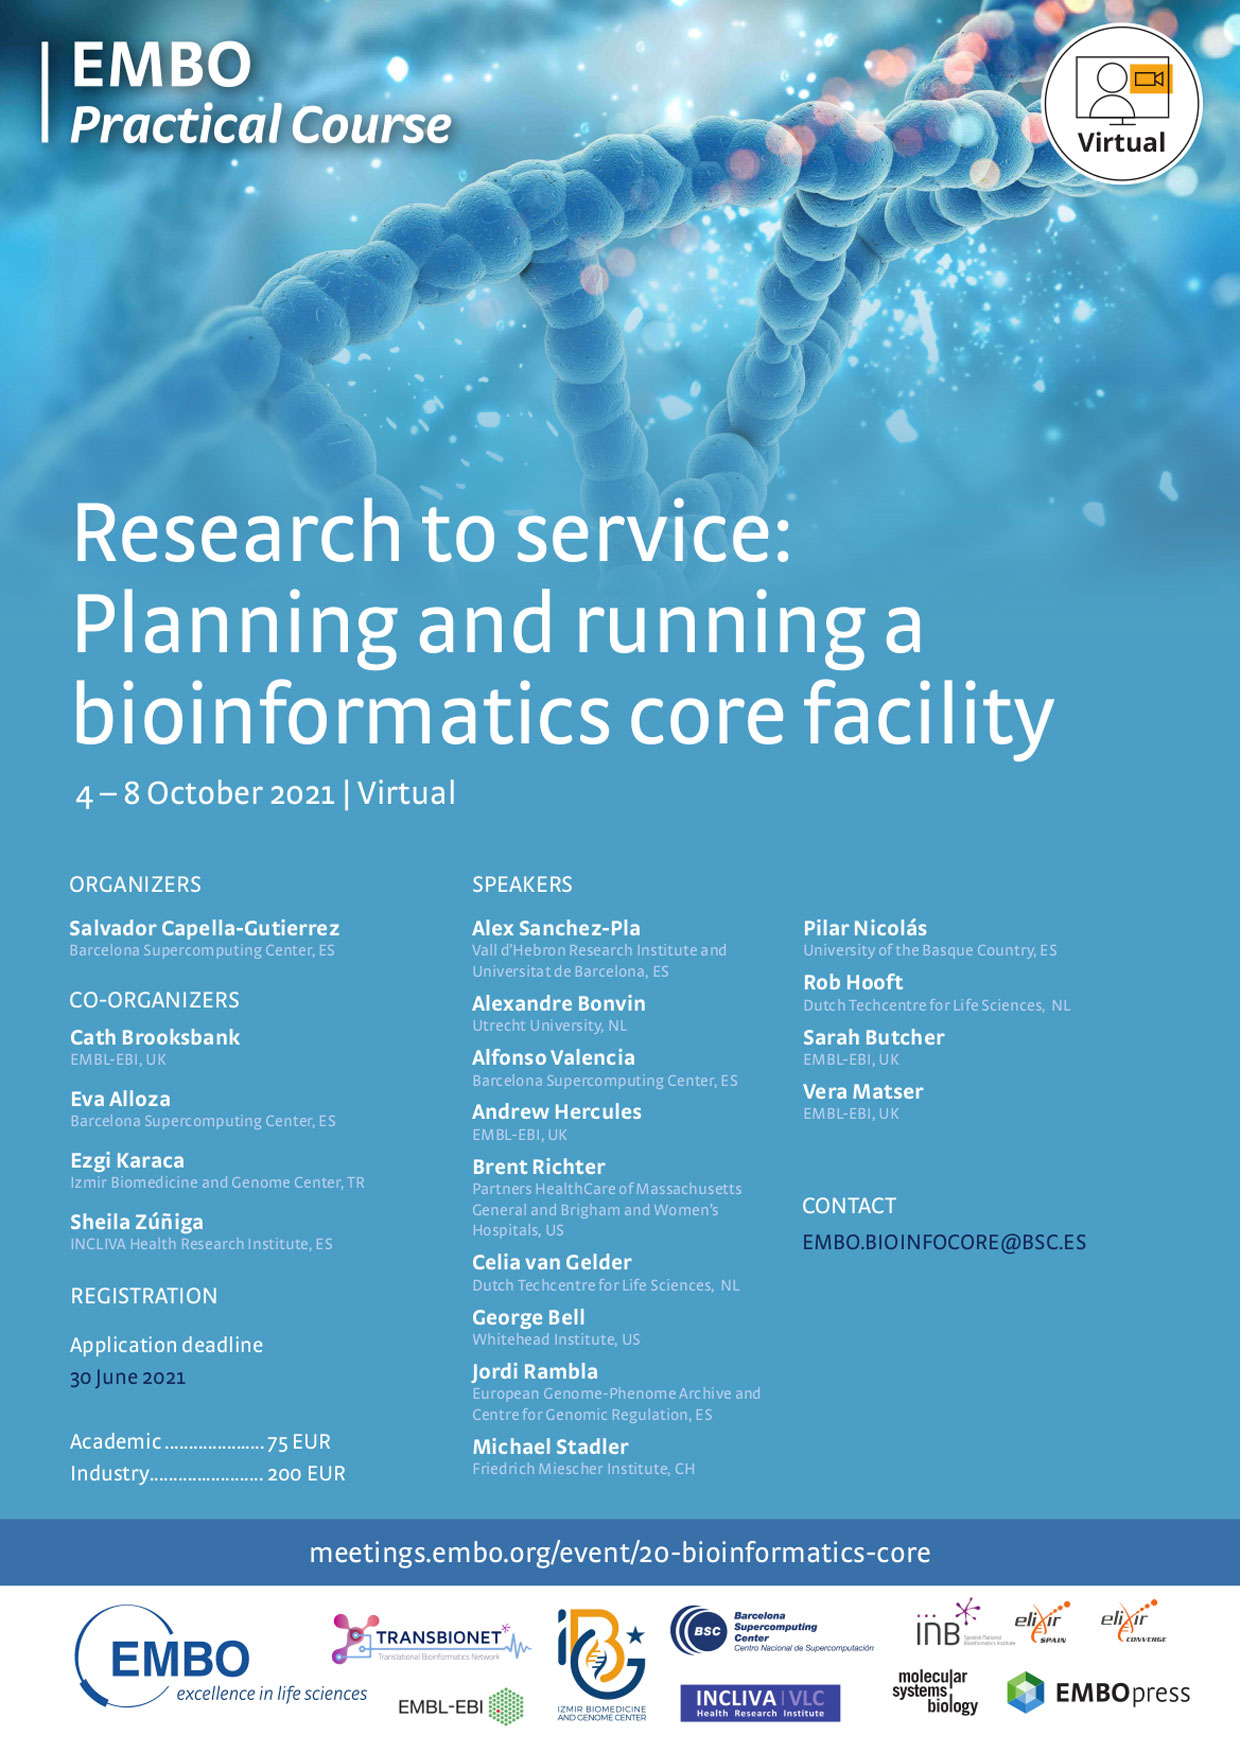 Research to Service: Planning and Running a Bioinformatics Core Facility